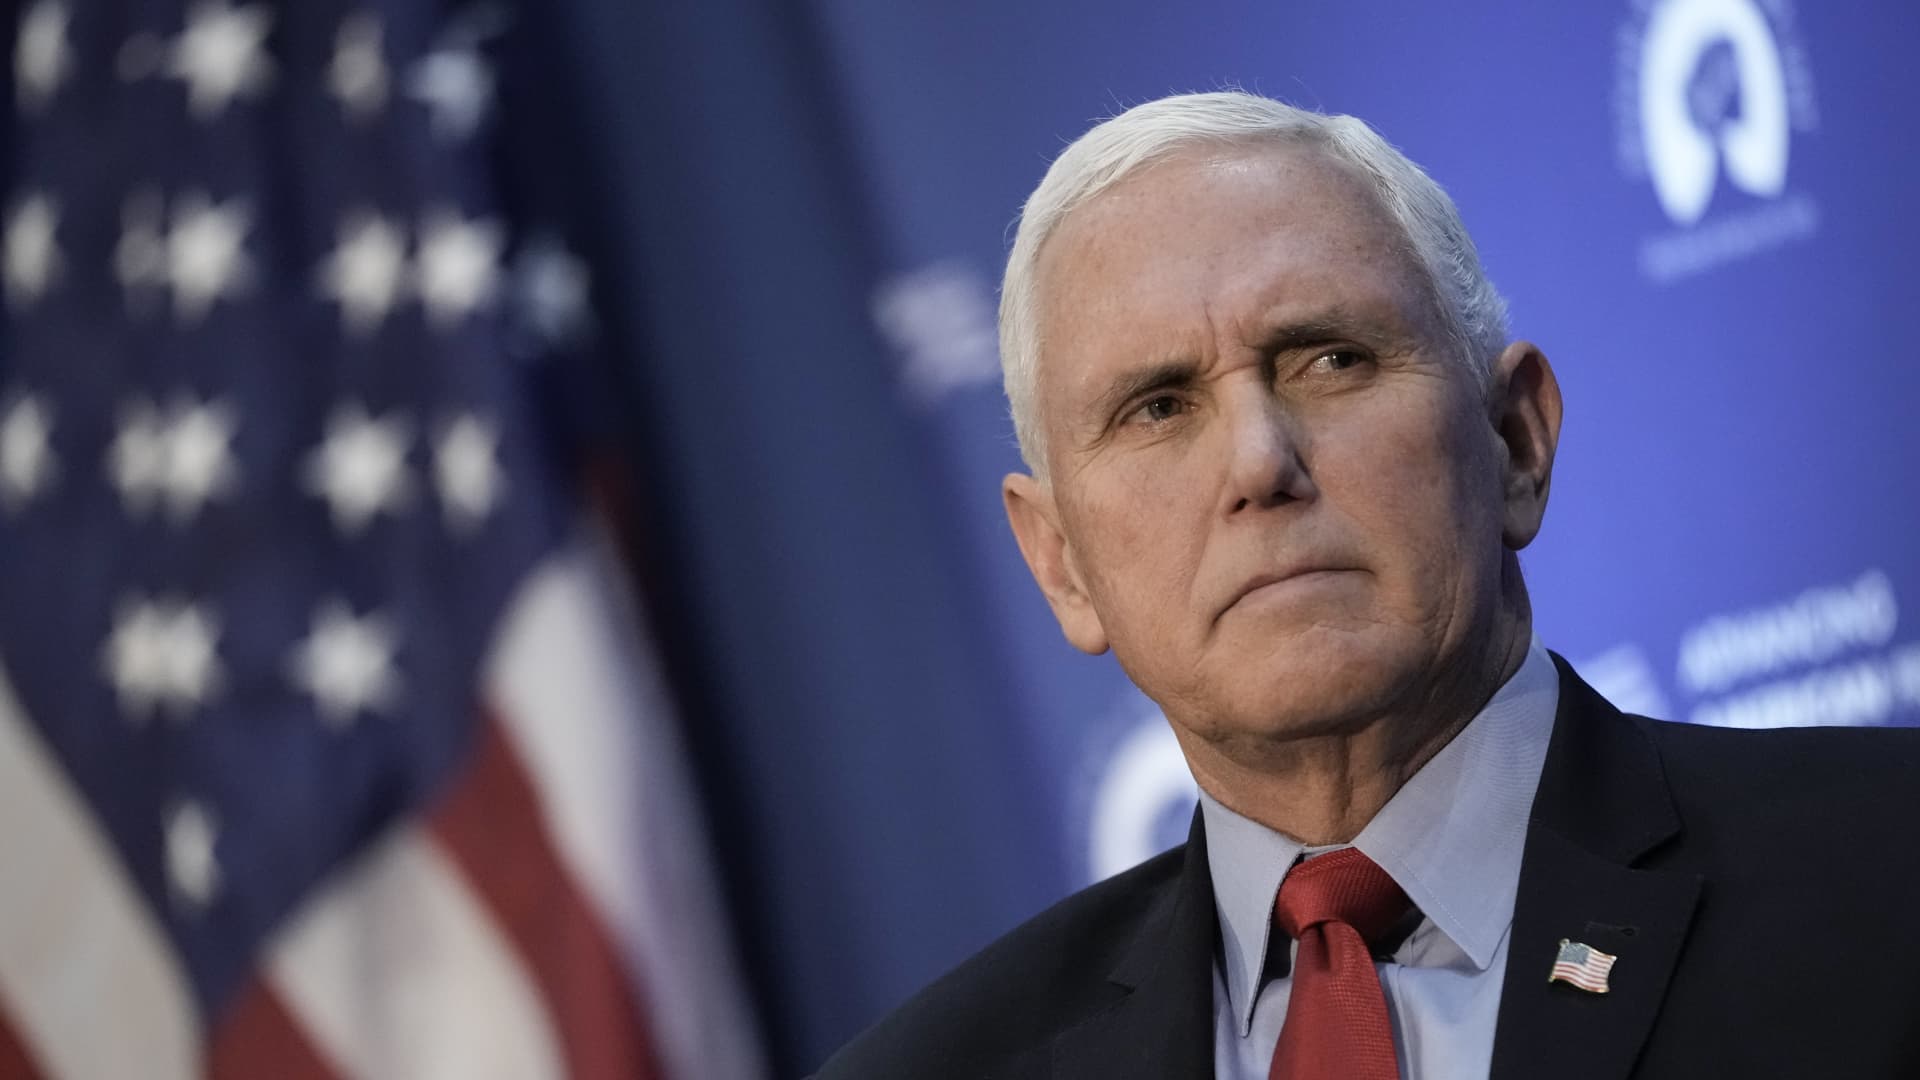 FBI is searching home of Mike Pence for more classified documents